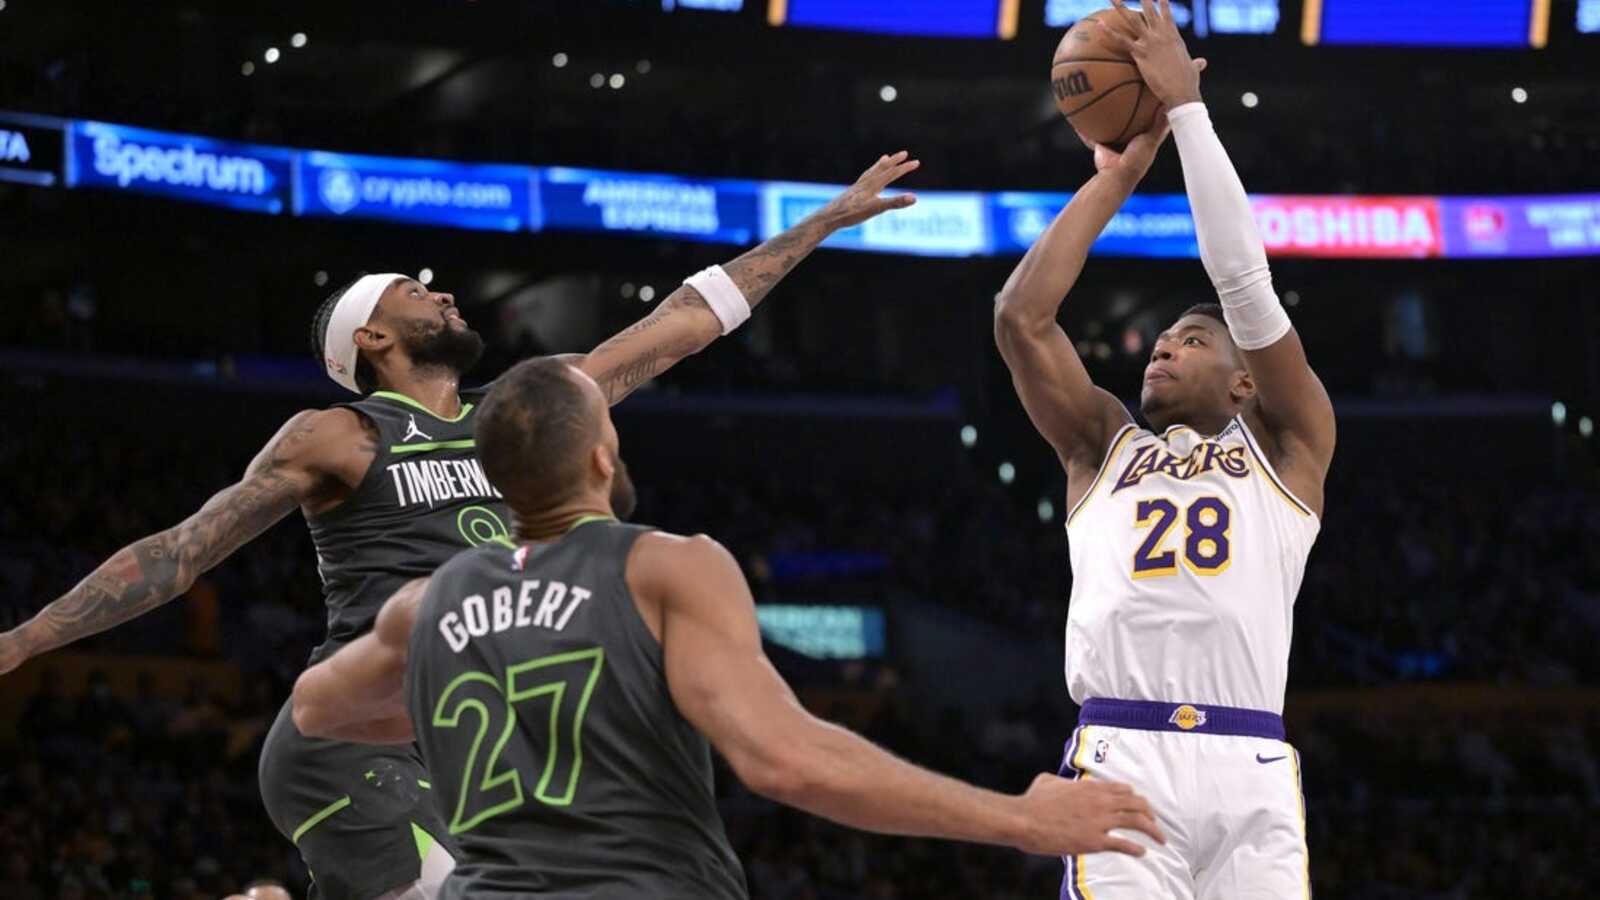 Lakers, Warriors face key matchup for playoff position